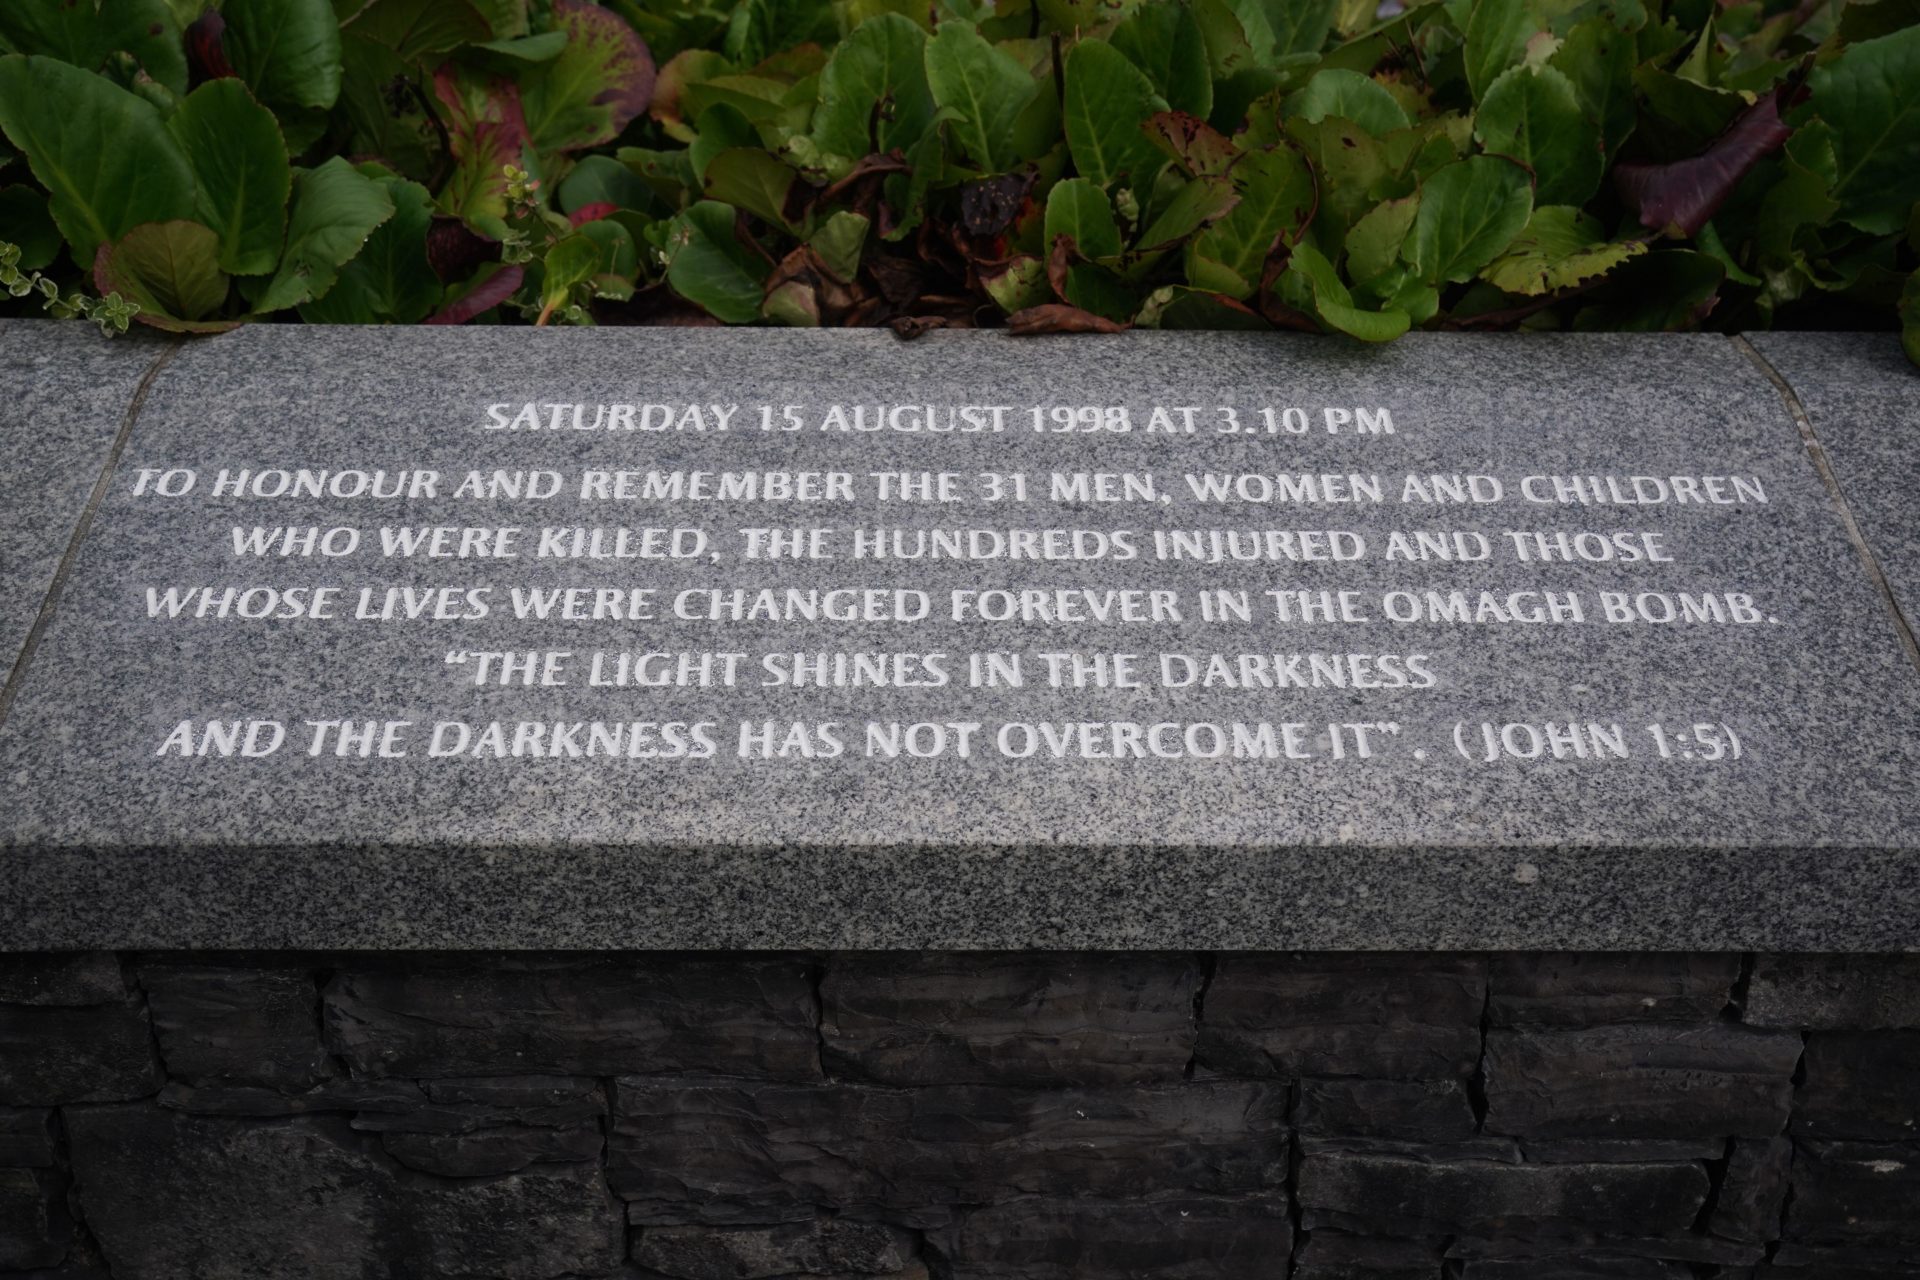 A memorial plaque at the service to mark the 25th anniversary of the bombing in Omagh in 1998, at the Memorial Gardens in Omagh, Co Tyrone.